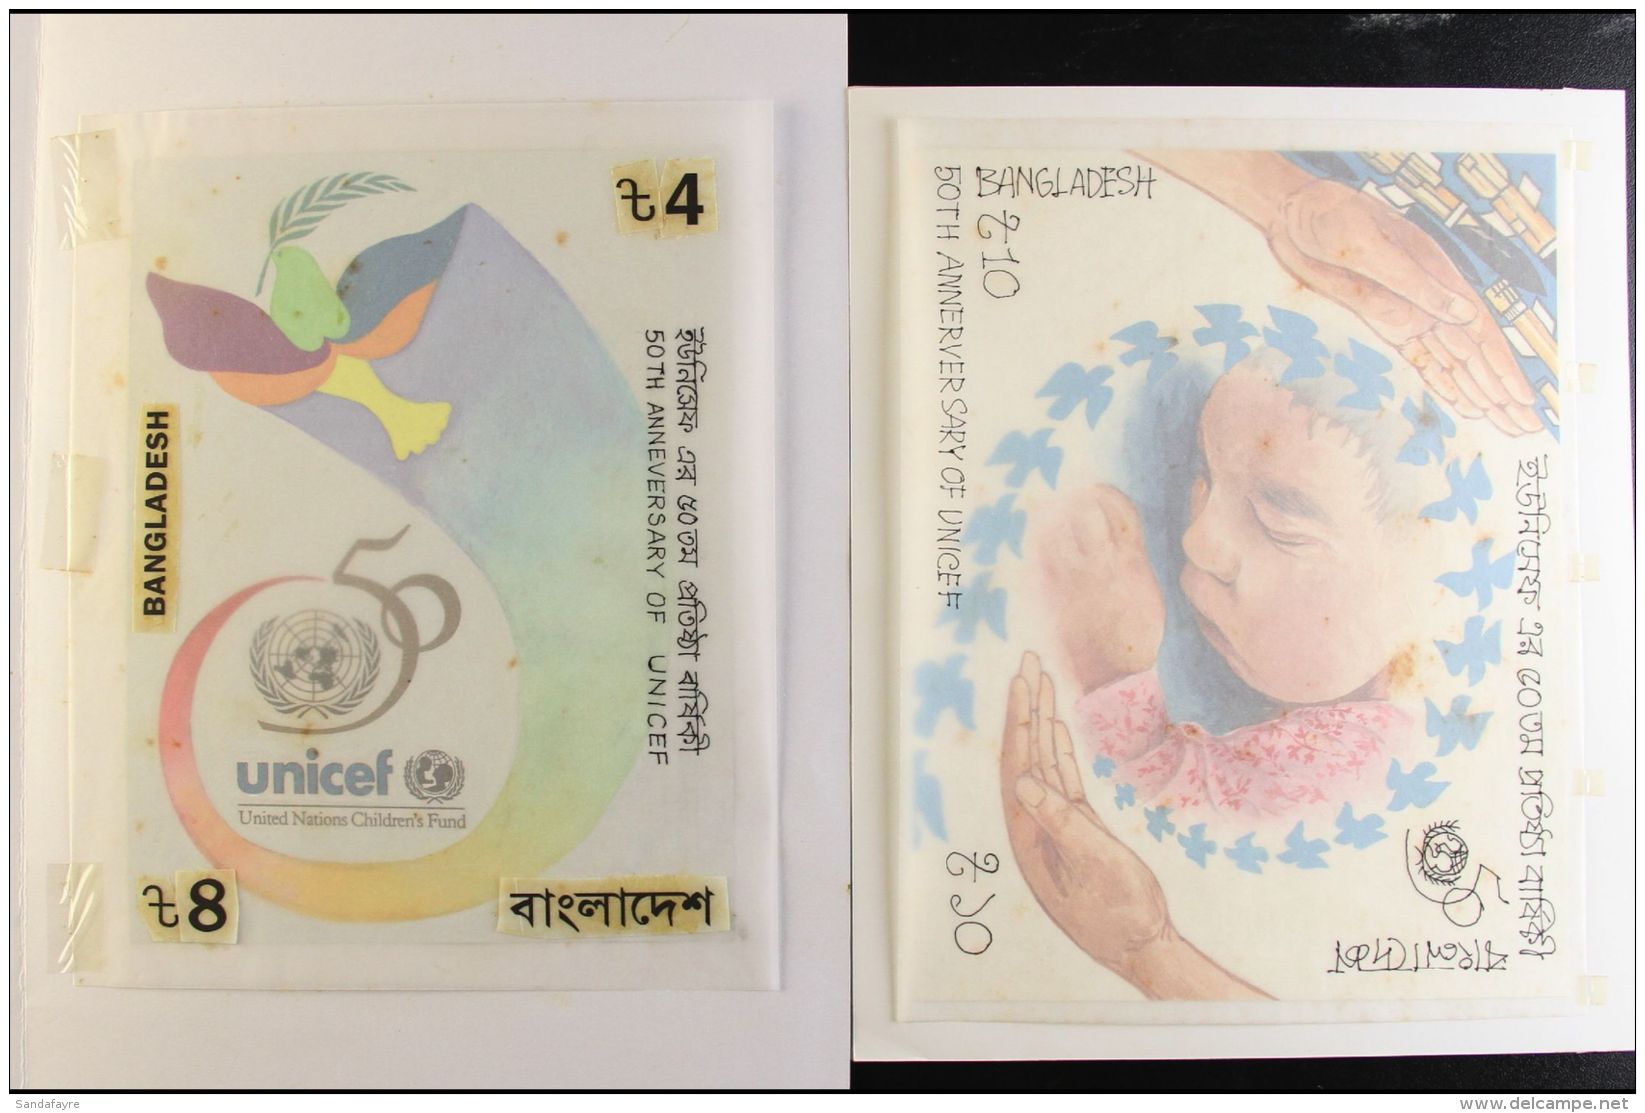 1996 UNICEF ESSAYS Artist's Unadopted Essays For Both Values Of The 50th Anniversary Of UNICEF Issue (SG 618/19),... - Bangladesh